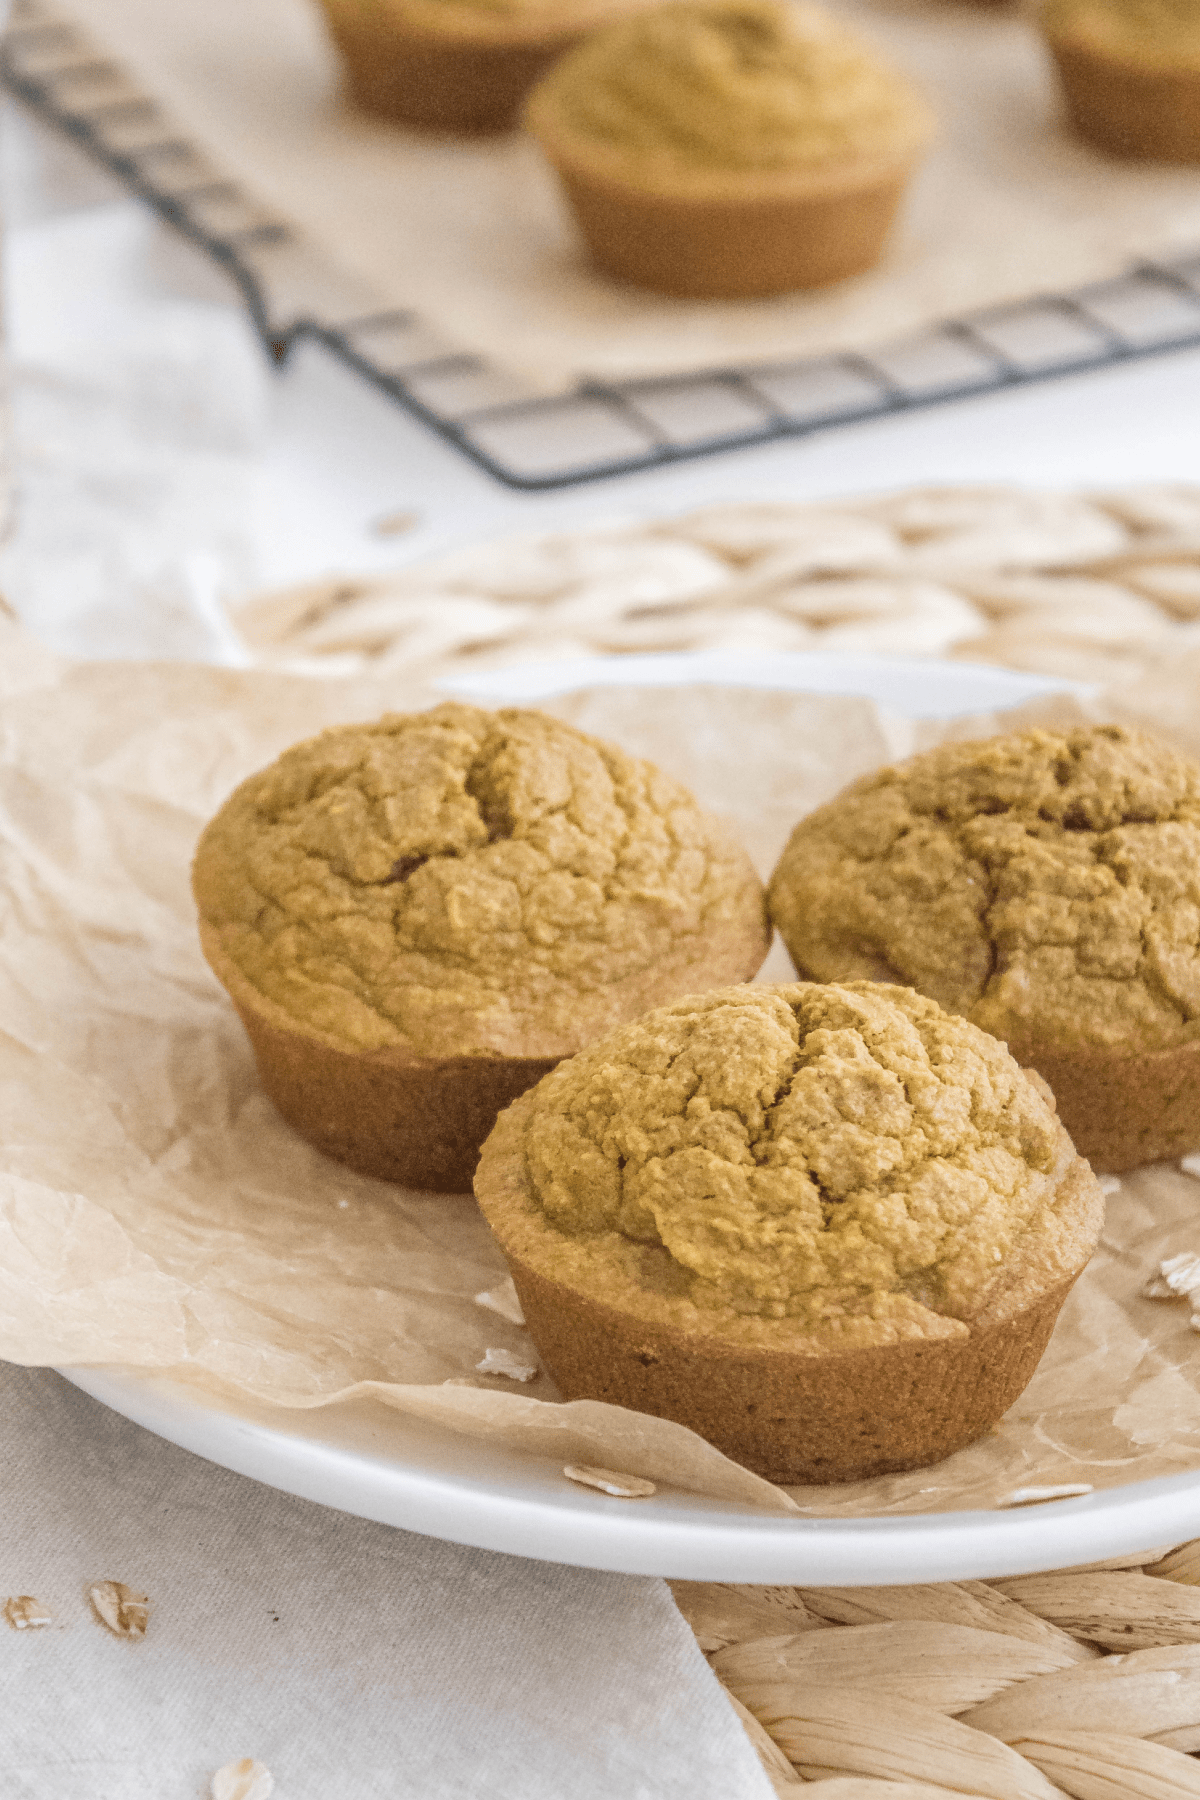 Oatmeal muffins on white plate